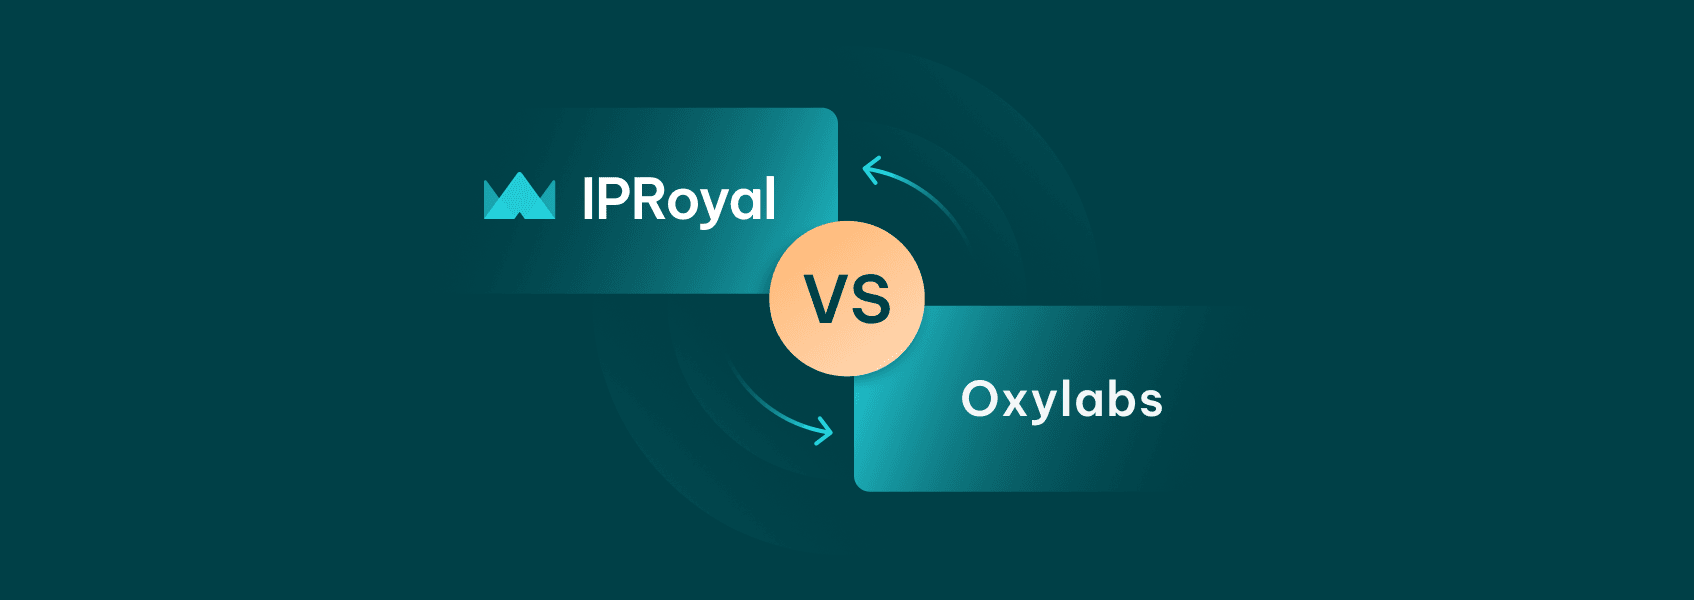 IPRoyal vs. Oxylabs - An In-depth Feature Comparison